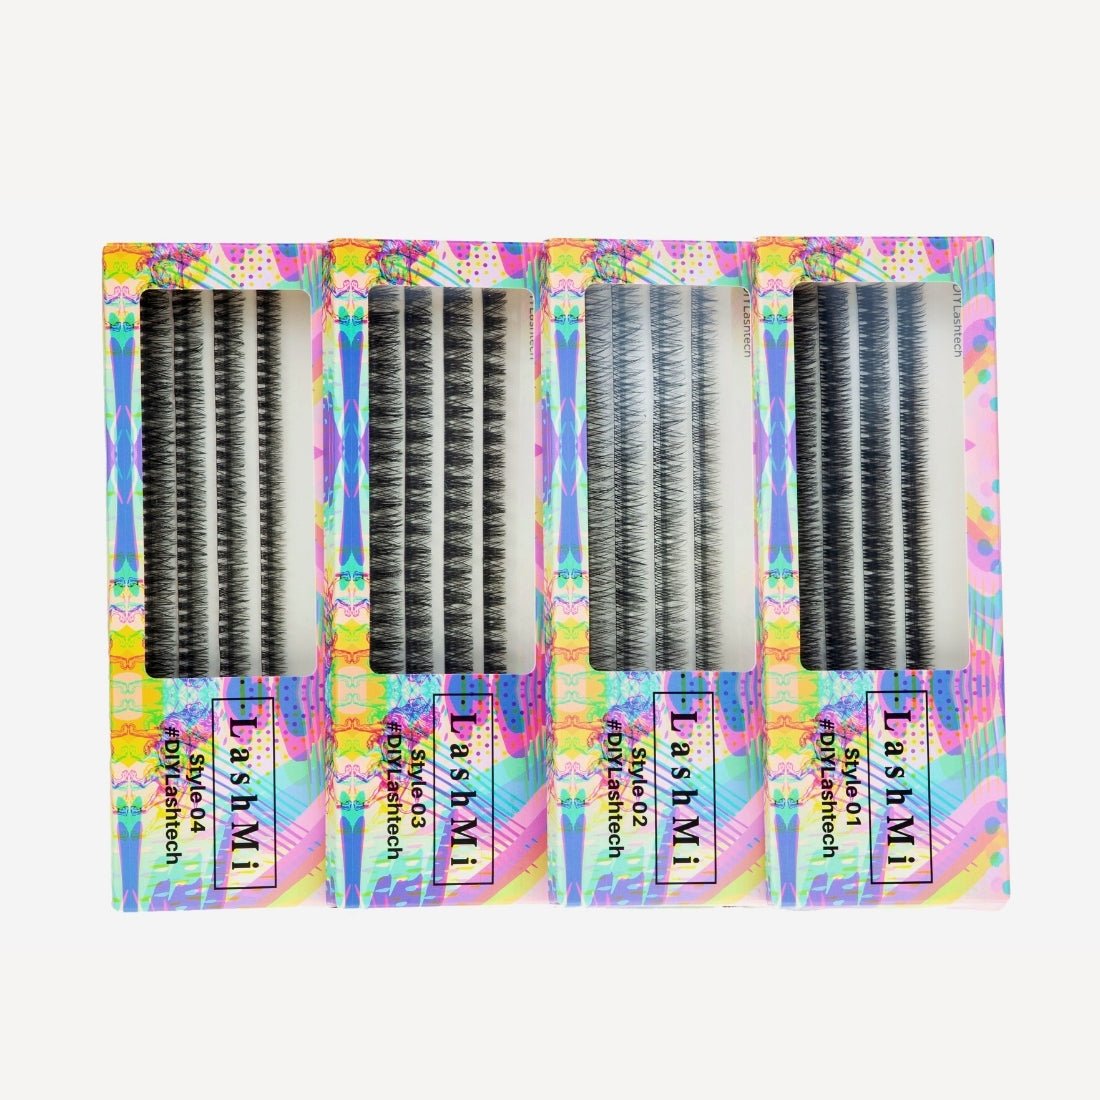 Lash Ribbons 4-pack Style 03